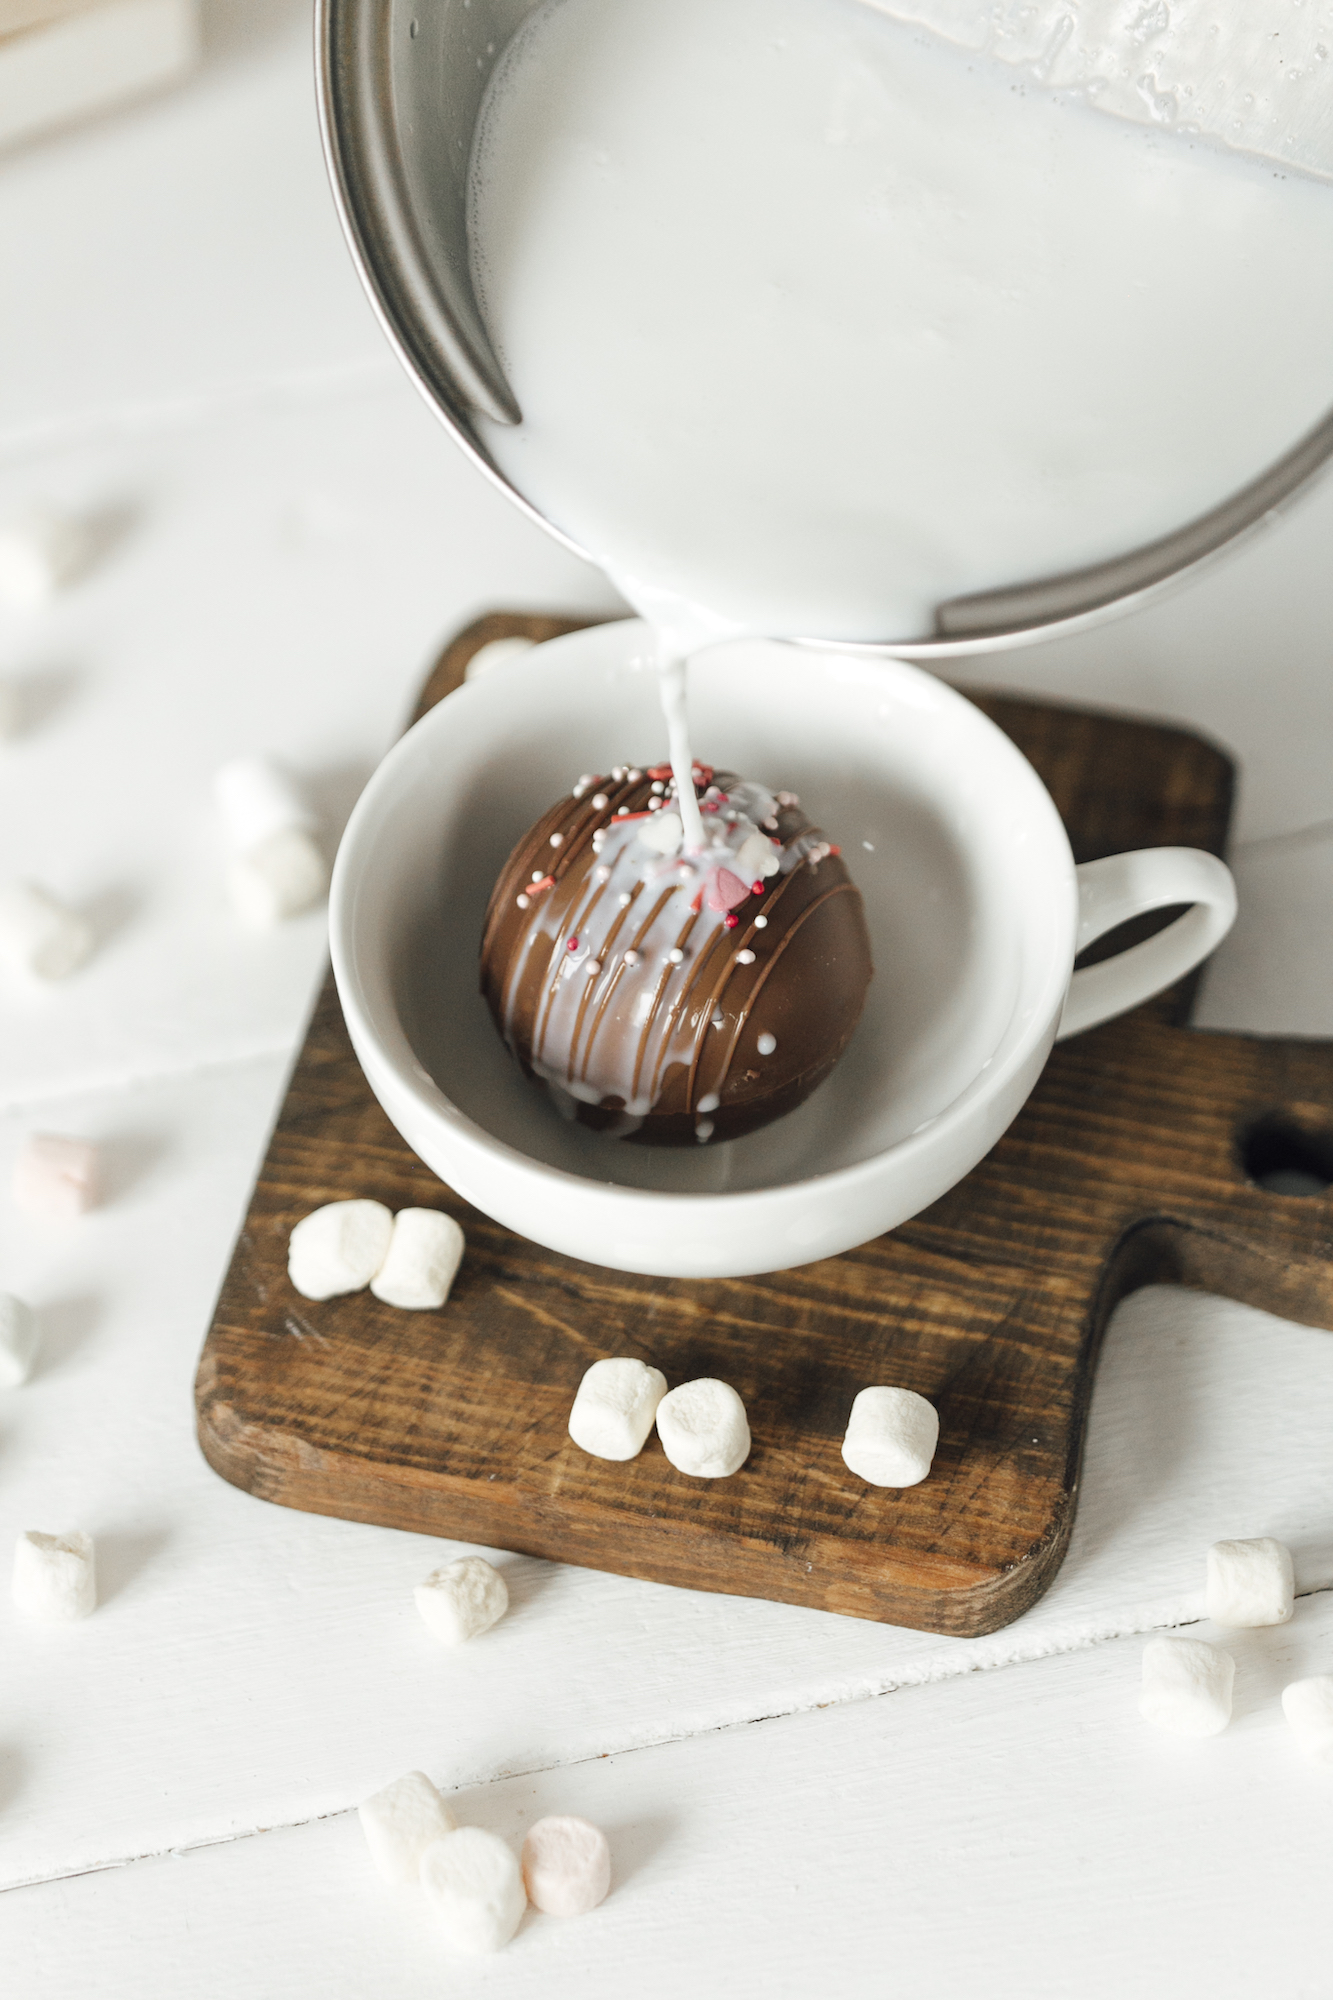 Image of warm milk being poured over hot chocolate cocoa bombs beside a description of how to increase sales of hot cocoa bombs in the food industry.